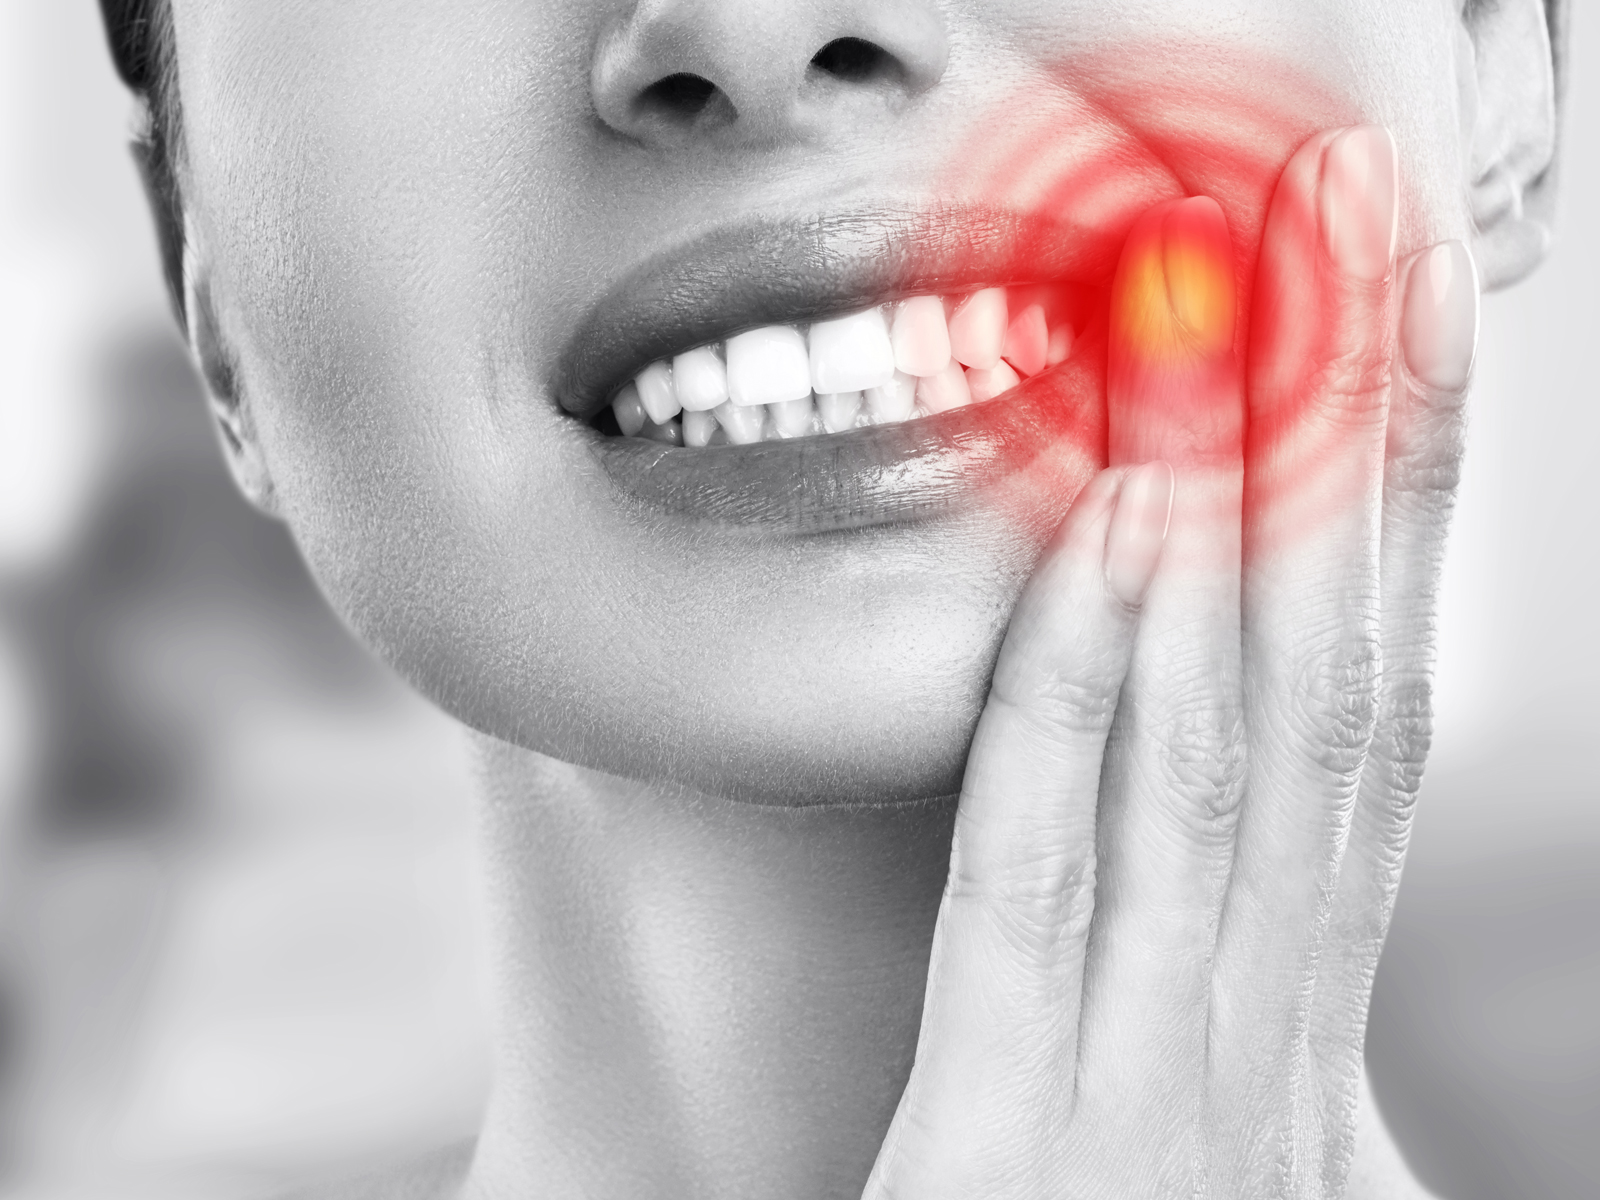 How Do I Know If My Toothache Is Serious?